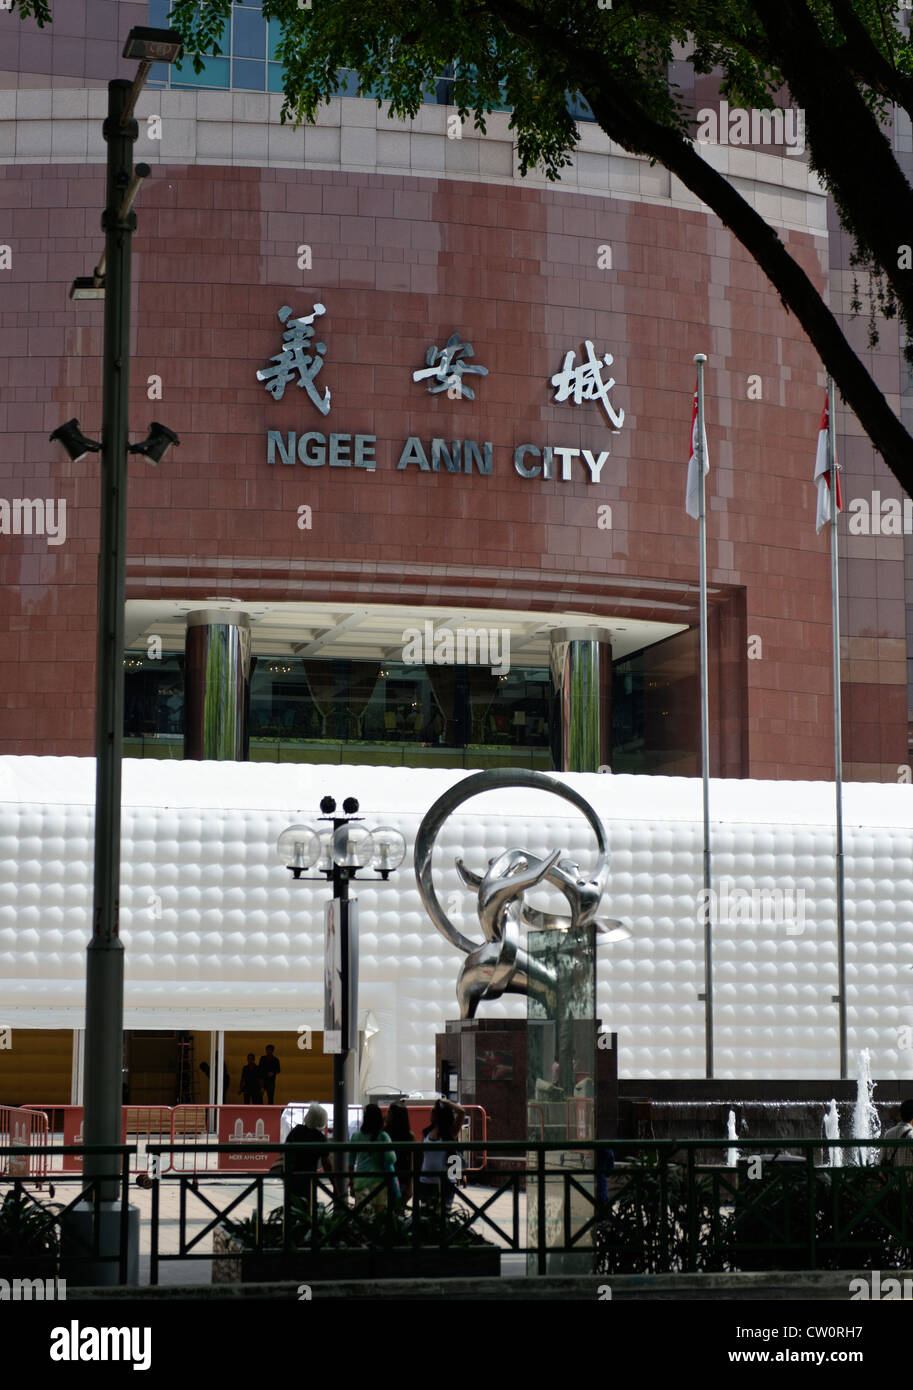 Ngee Ann City Singapore - Shopping Complex on Orchard Road – Go Guides